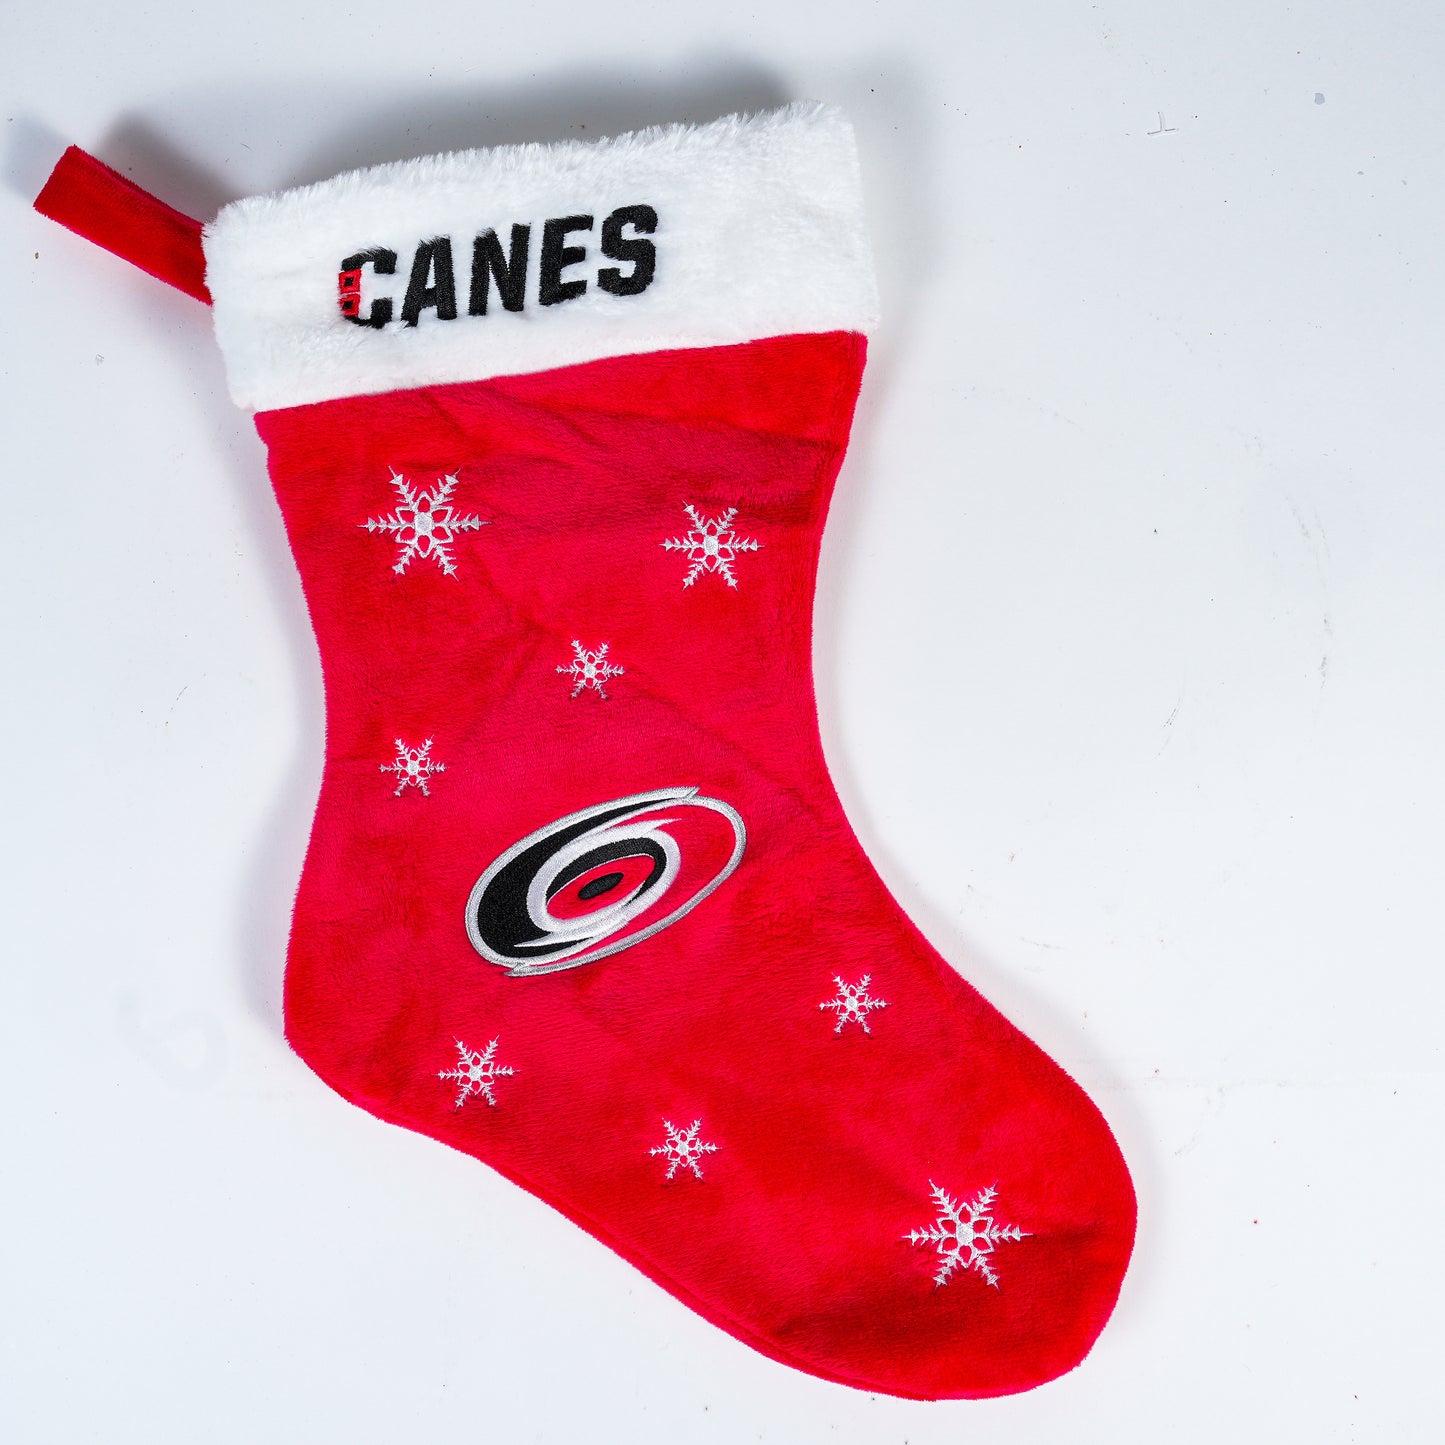 Stocking with CANES wordmark at top and Hurricanes logo with snowflakes on red portion 